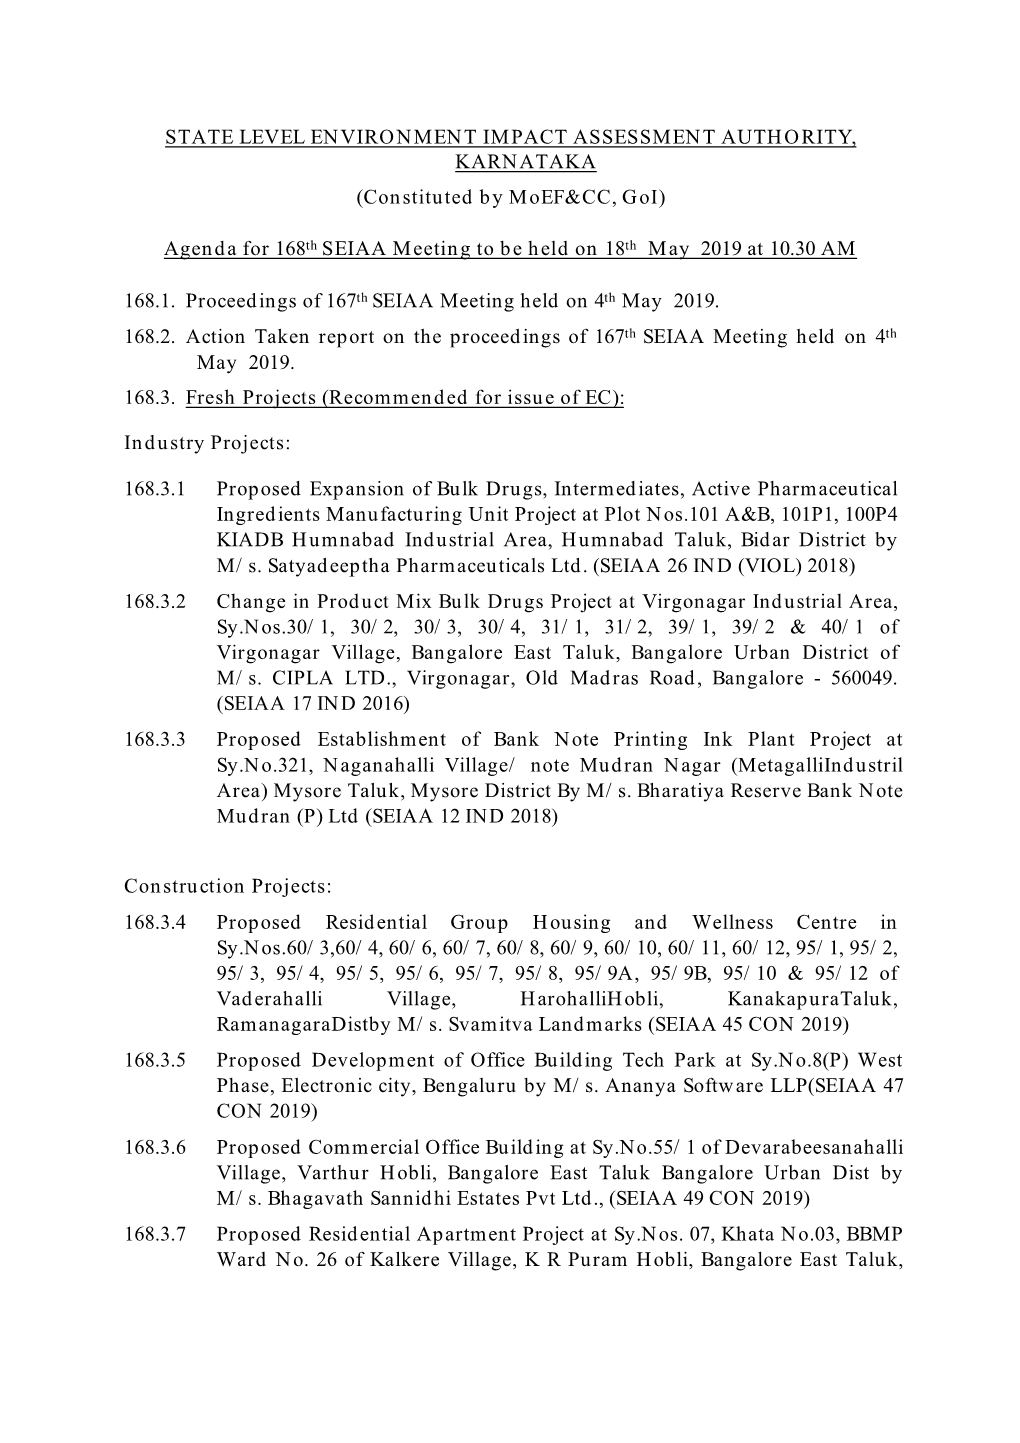 (Constituted by Moef&CC, Goi) Agenda for 168Th SEIAA Meeting